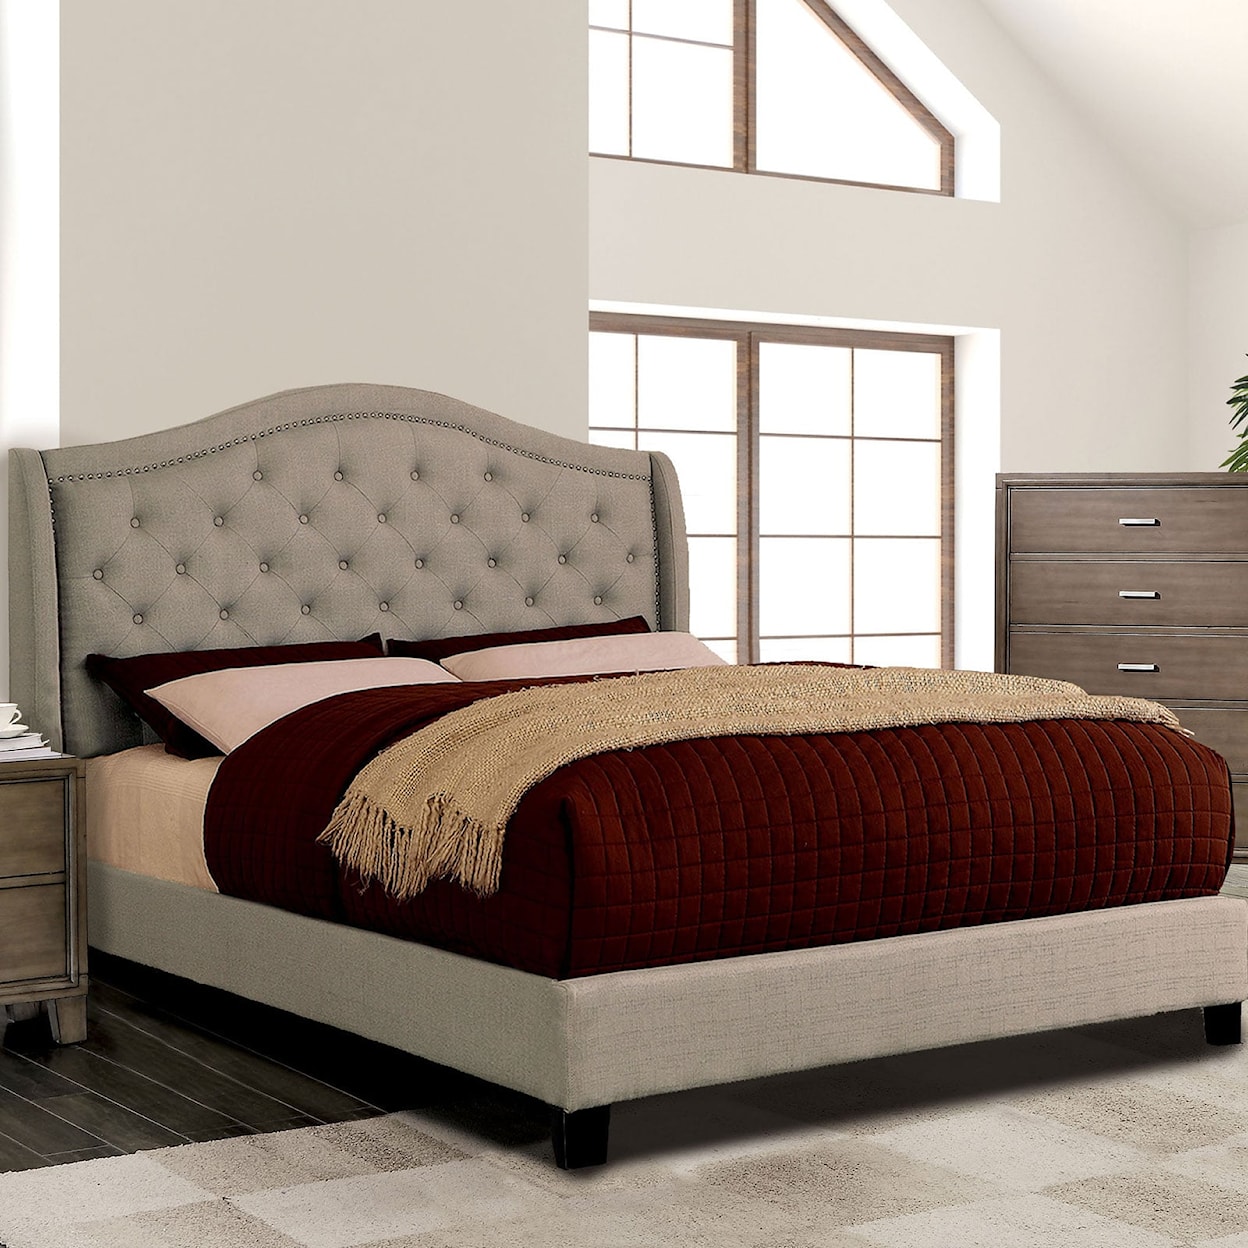 Furniture of America Carly E.King Bed, Warm Gray